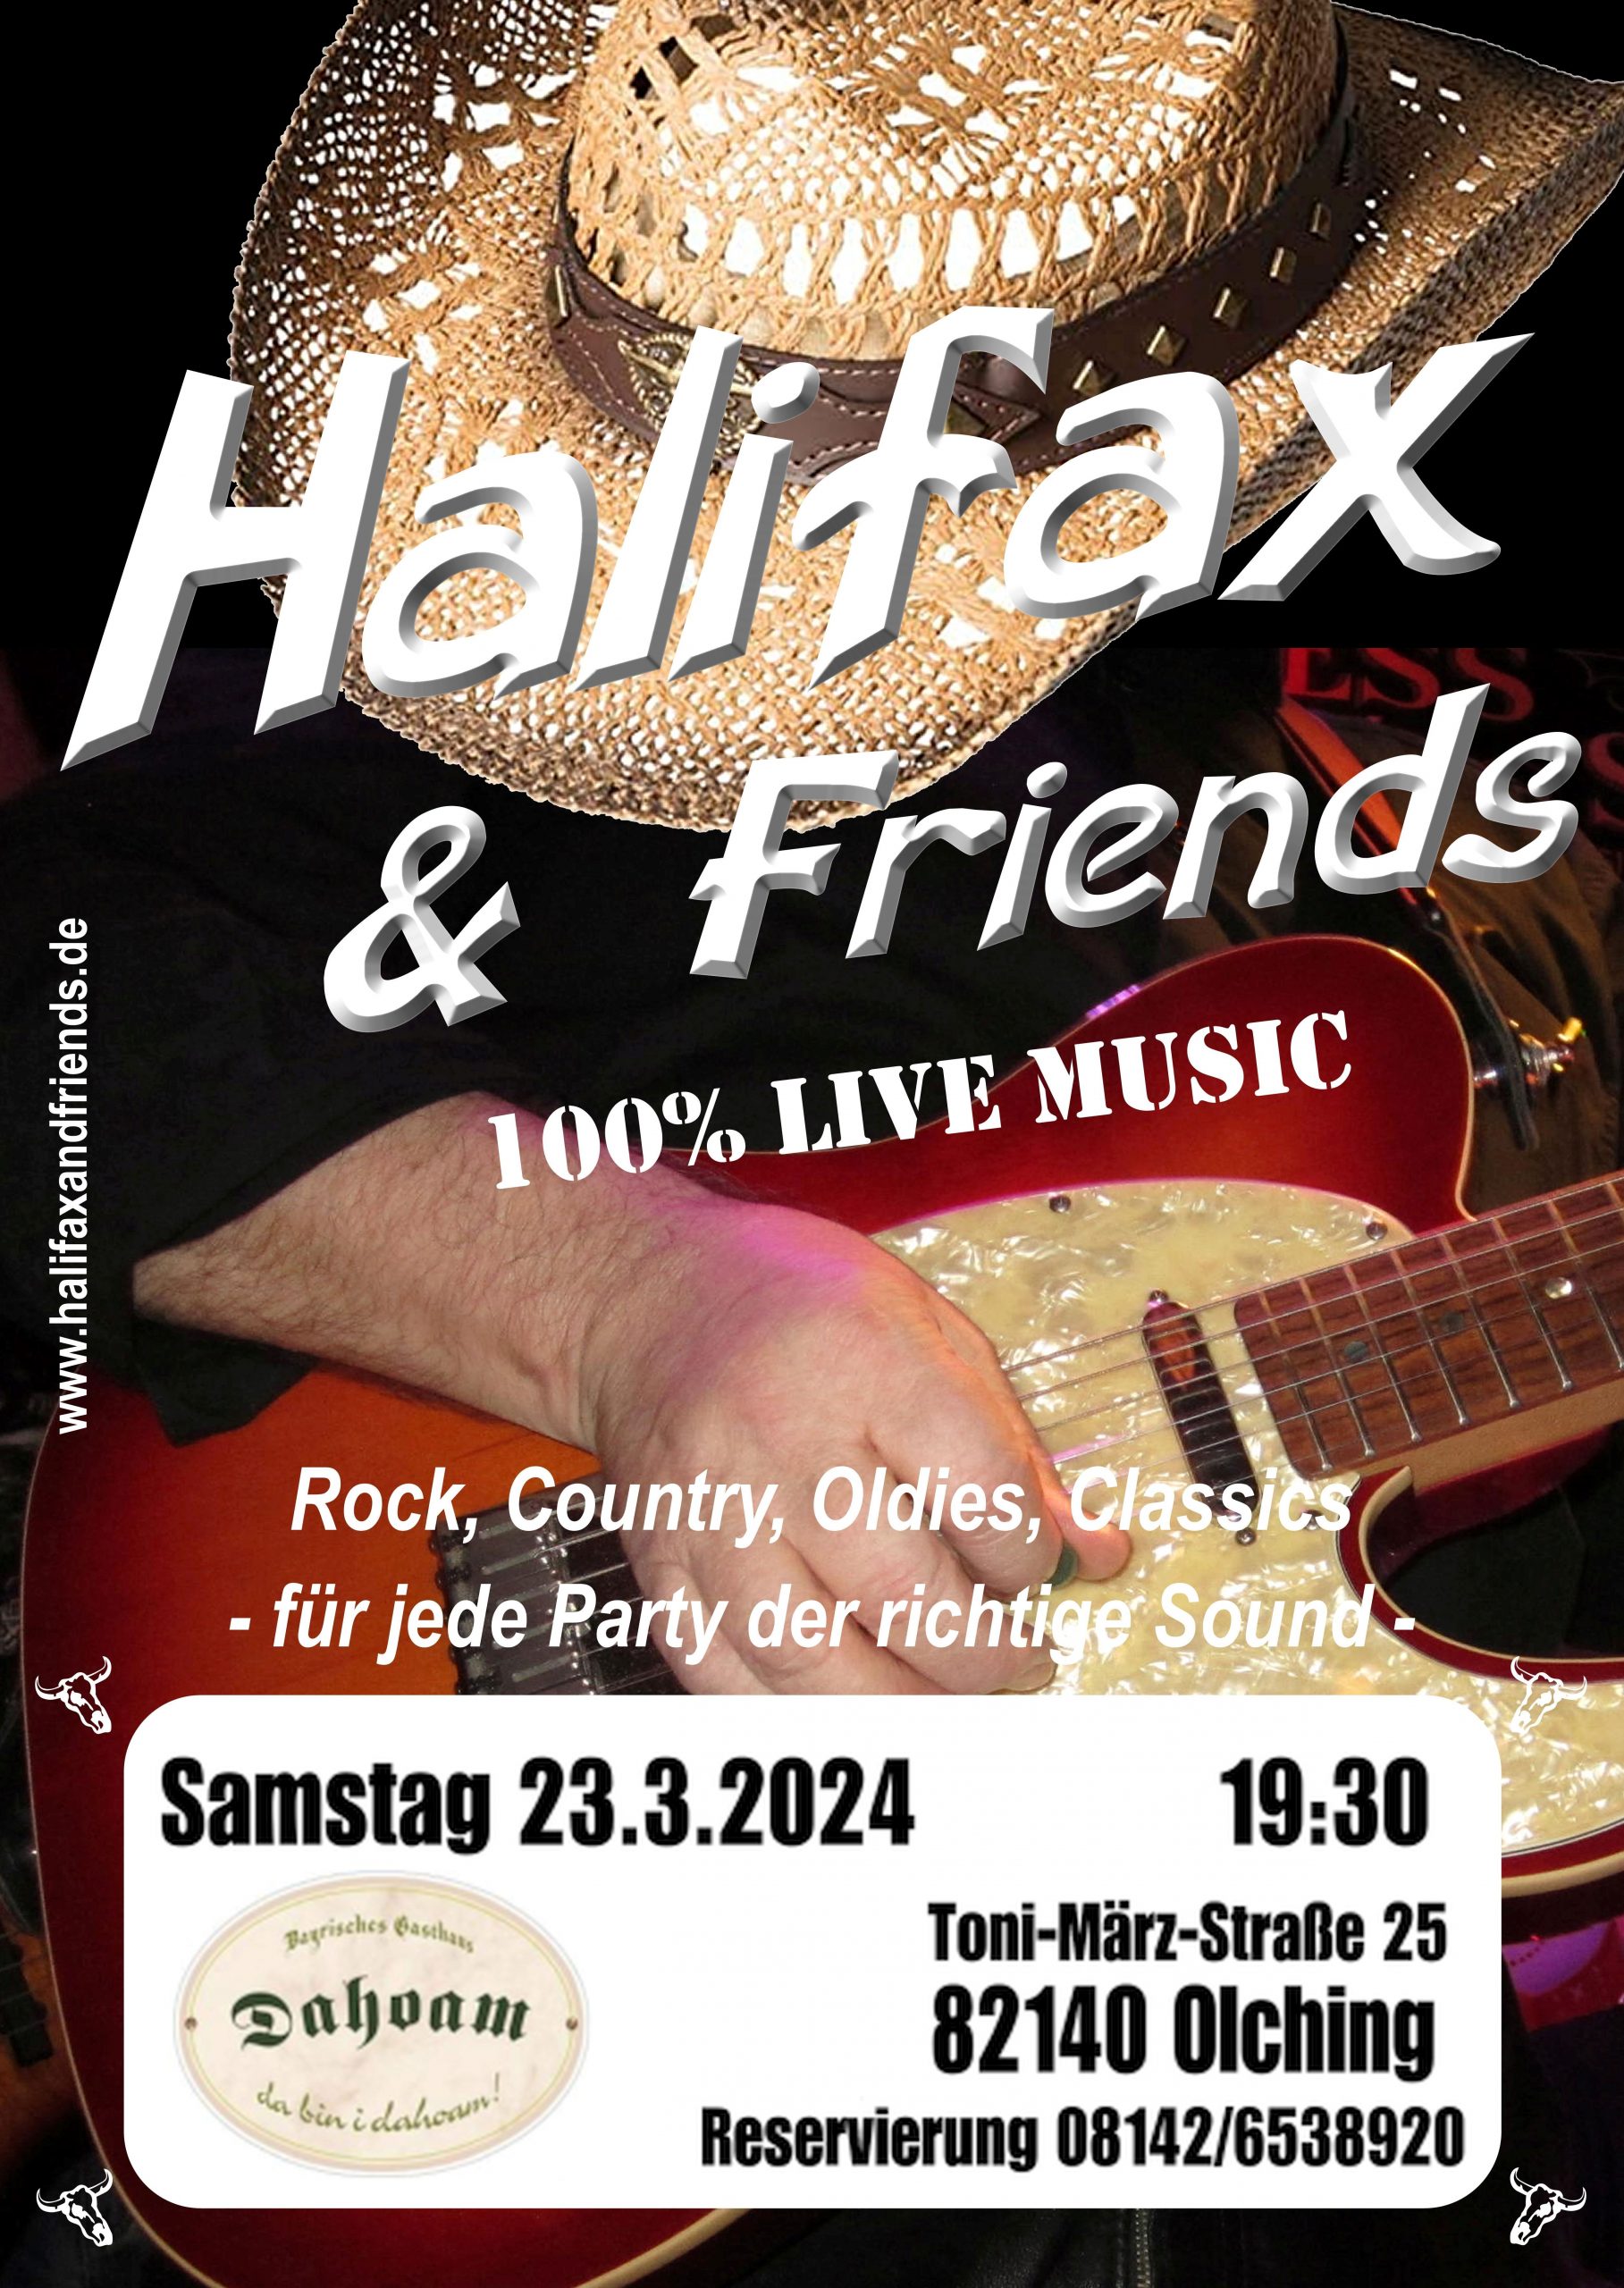 Featured image for “Halifax & Friends am 23.03.2024”